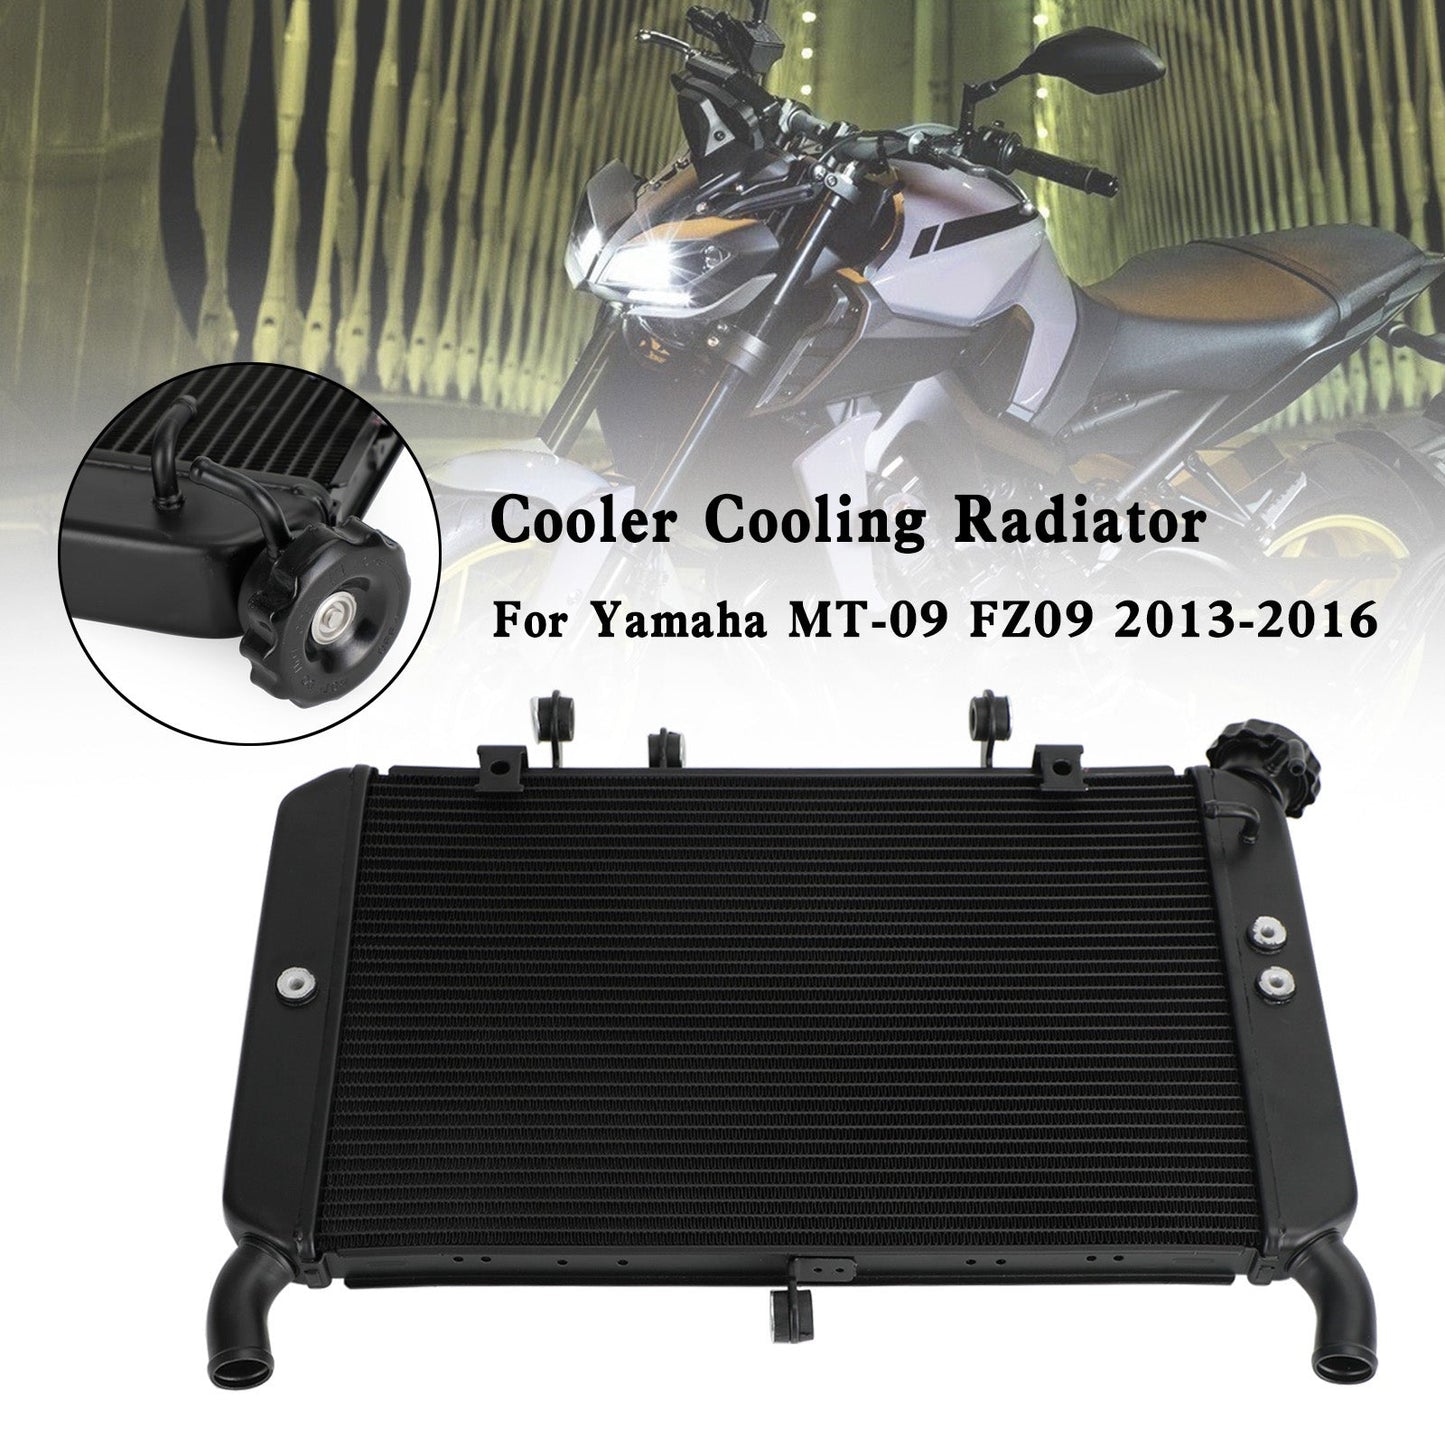 Core Engine Water Cooling Cooler Radiator For Yamaha MT-09 FZ09 2013-2016